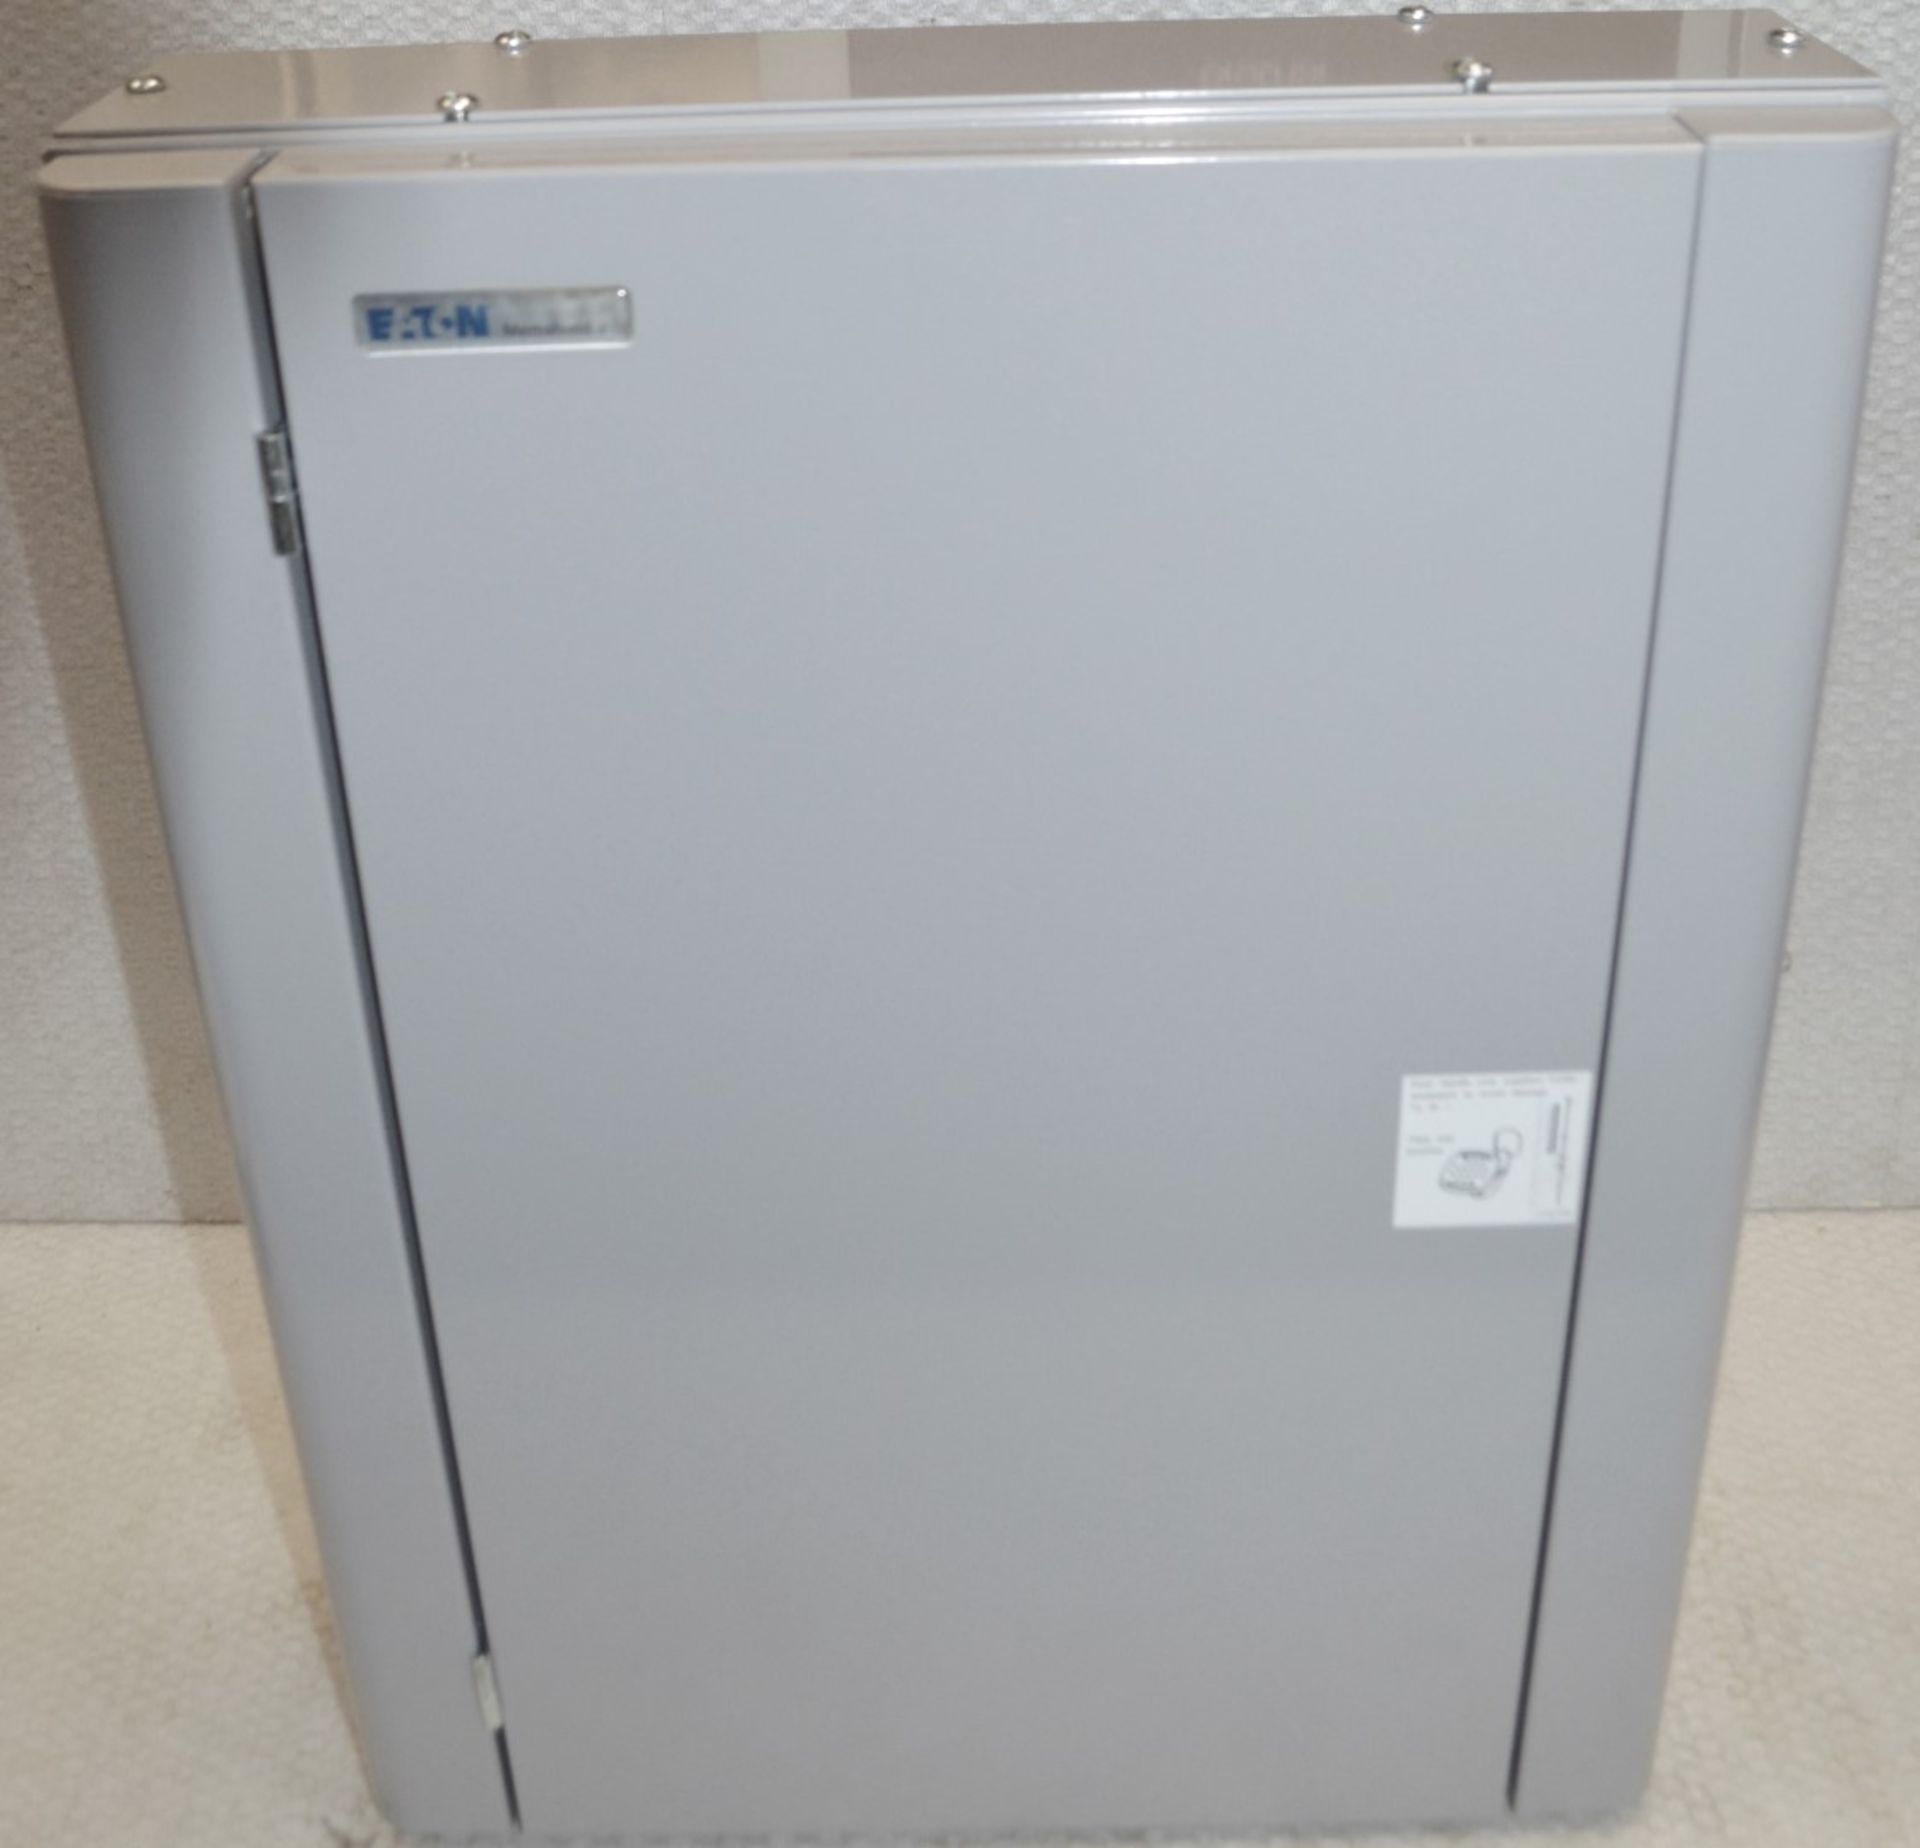 1 x Eaton MEM 125A 12 Way Triple Pole and Neutral 3 Phase Distribution Board Cabinet - CL011 - - Image 3 of 3